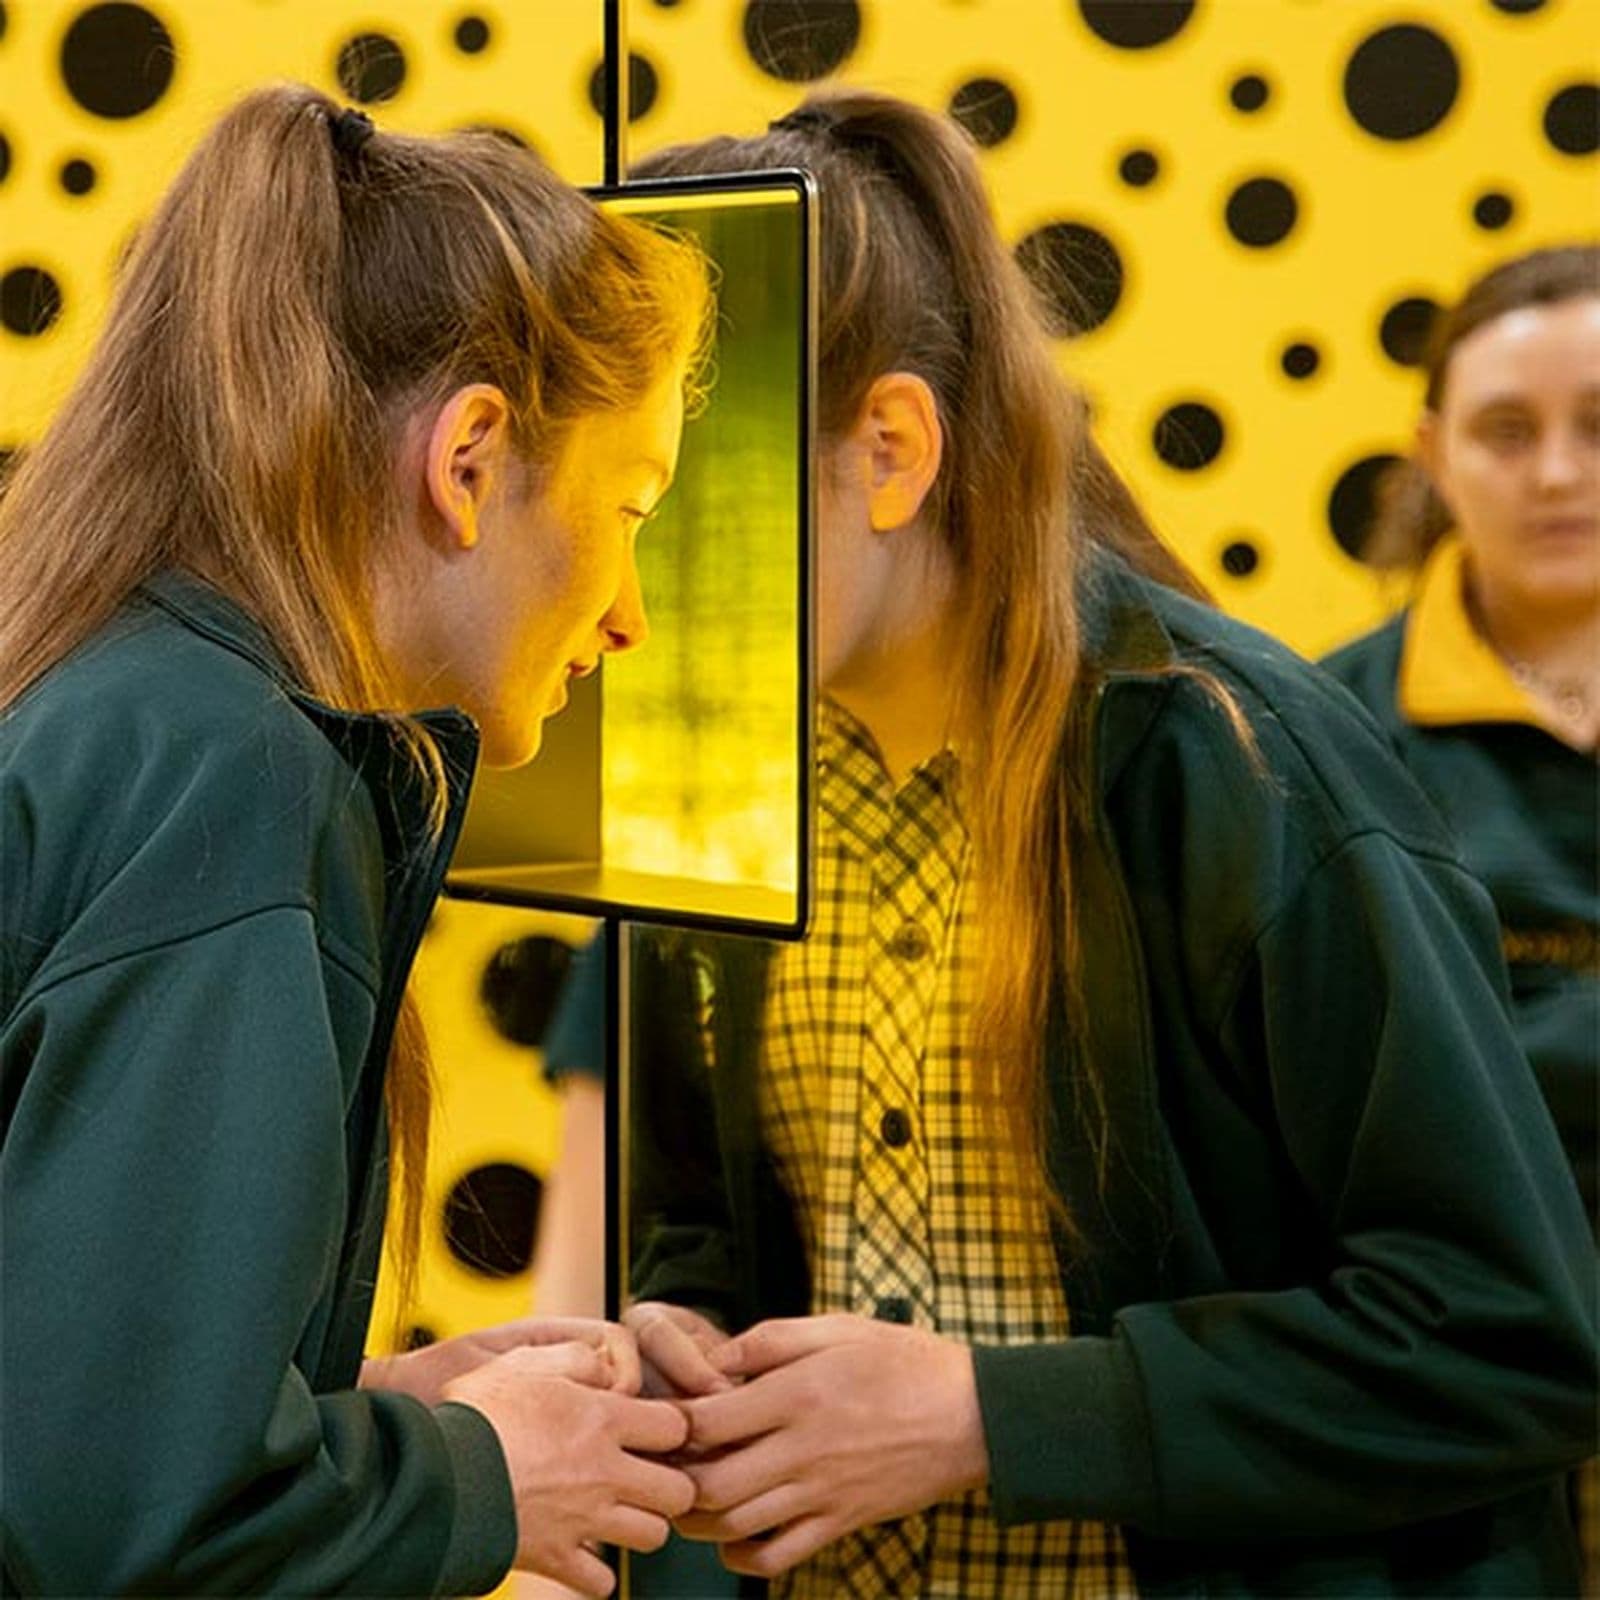 Secondary school aged girl looking through through a mirrored box window as part of an installation.